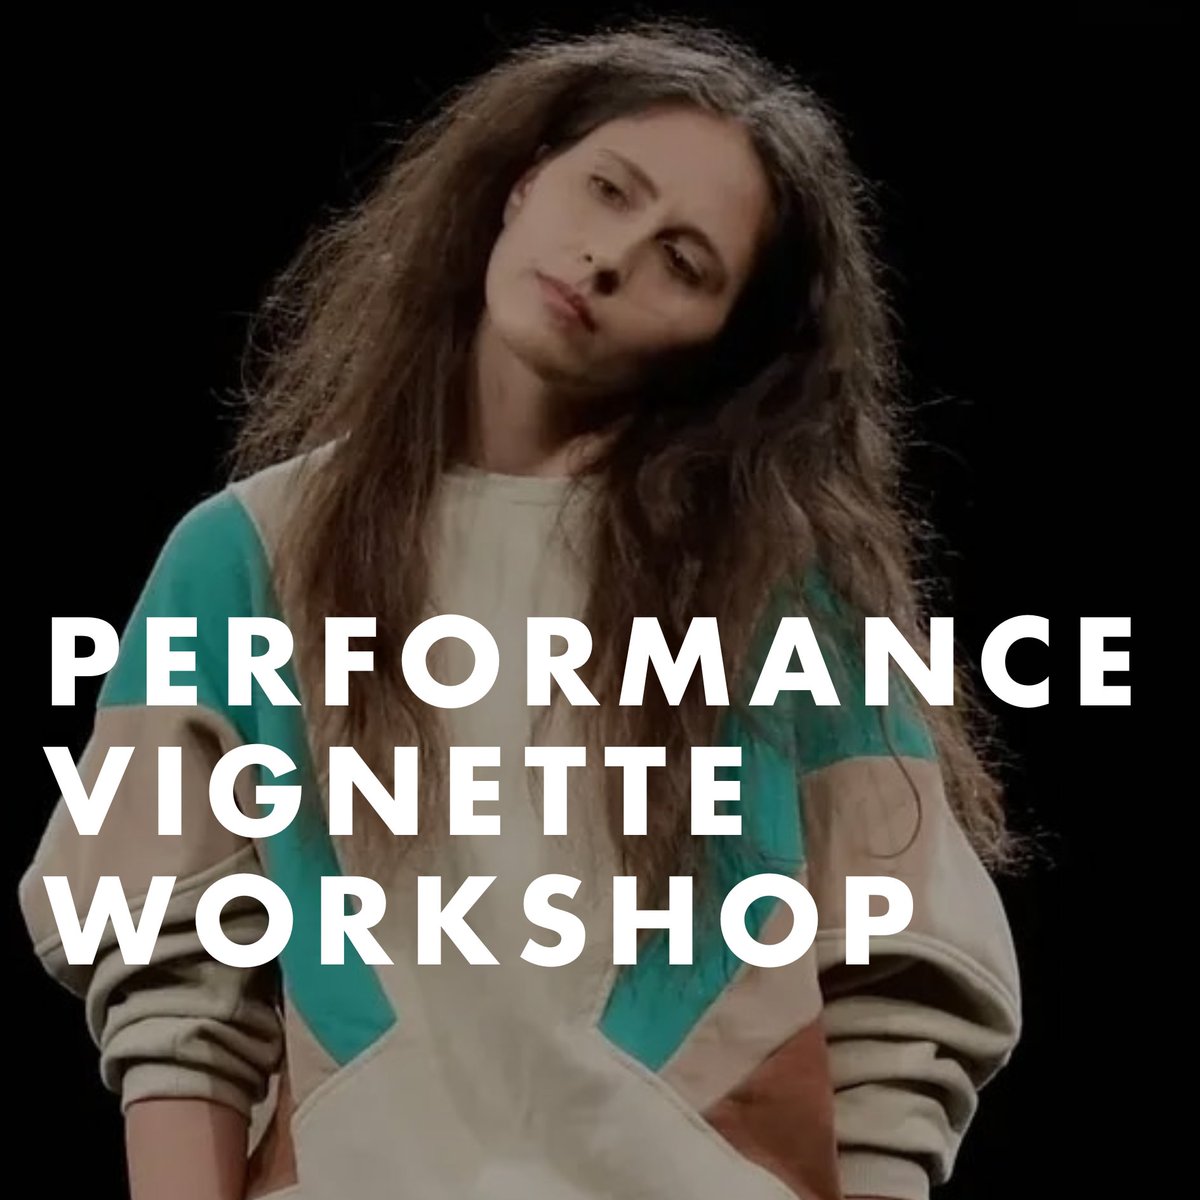 Learn how to create your own performance vignettes in our playful skills-based New Tricks workshop with Soraya Nabipour! FREE, Sat 11 May 11–2. Spaces are limited! Find out more and book now > sitegallery.org/event/abstract…